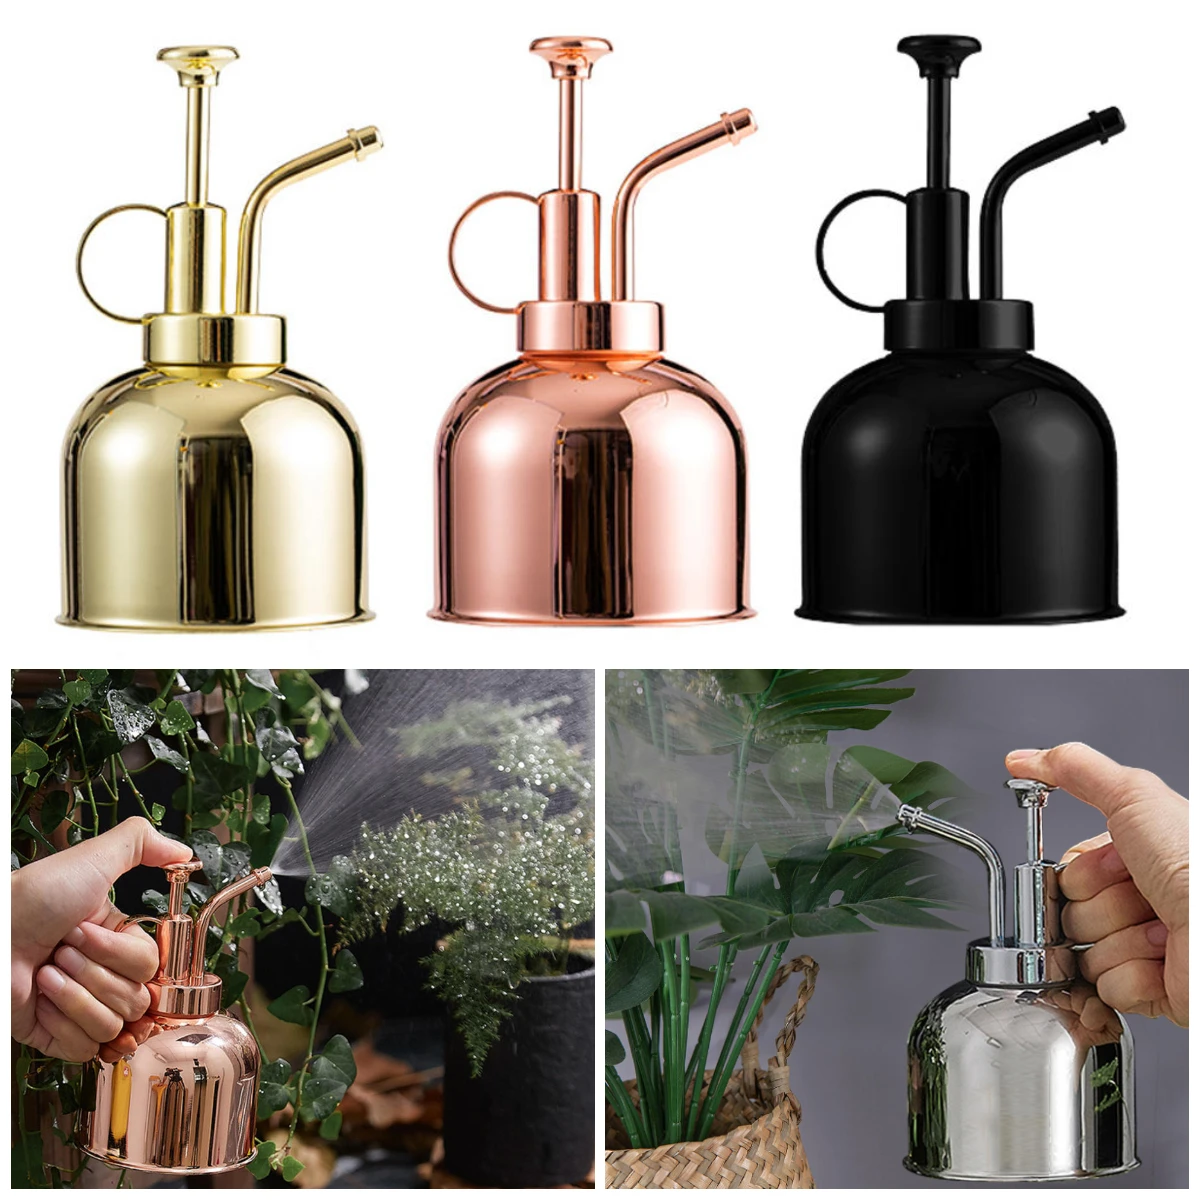 

300ml Stainless Steel Plant Spritzer Watering Bottle with Top Pump Plant Mister Spray Bottle Succulents Garden Watering Tool